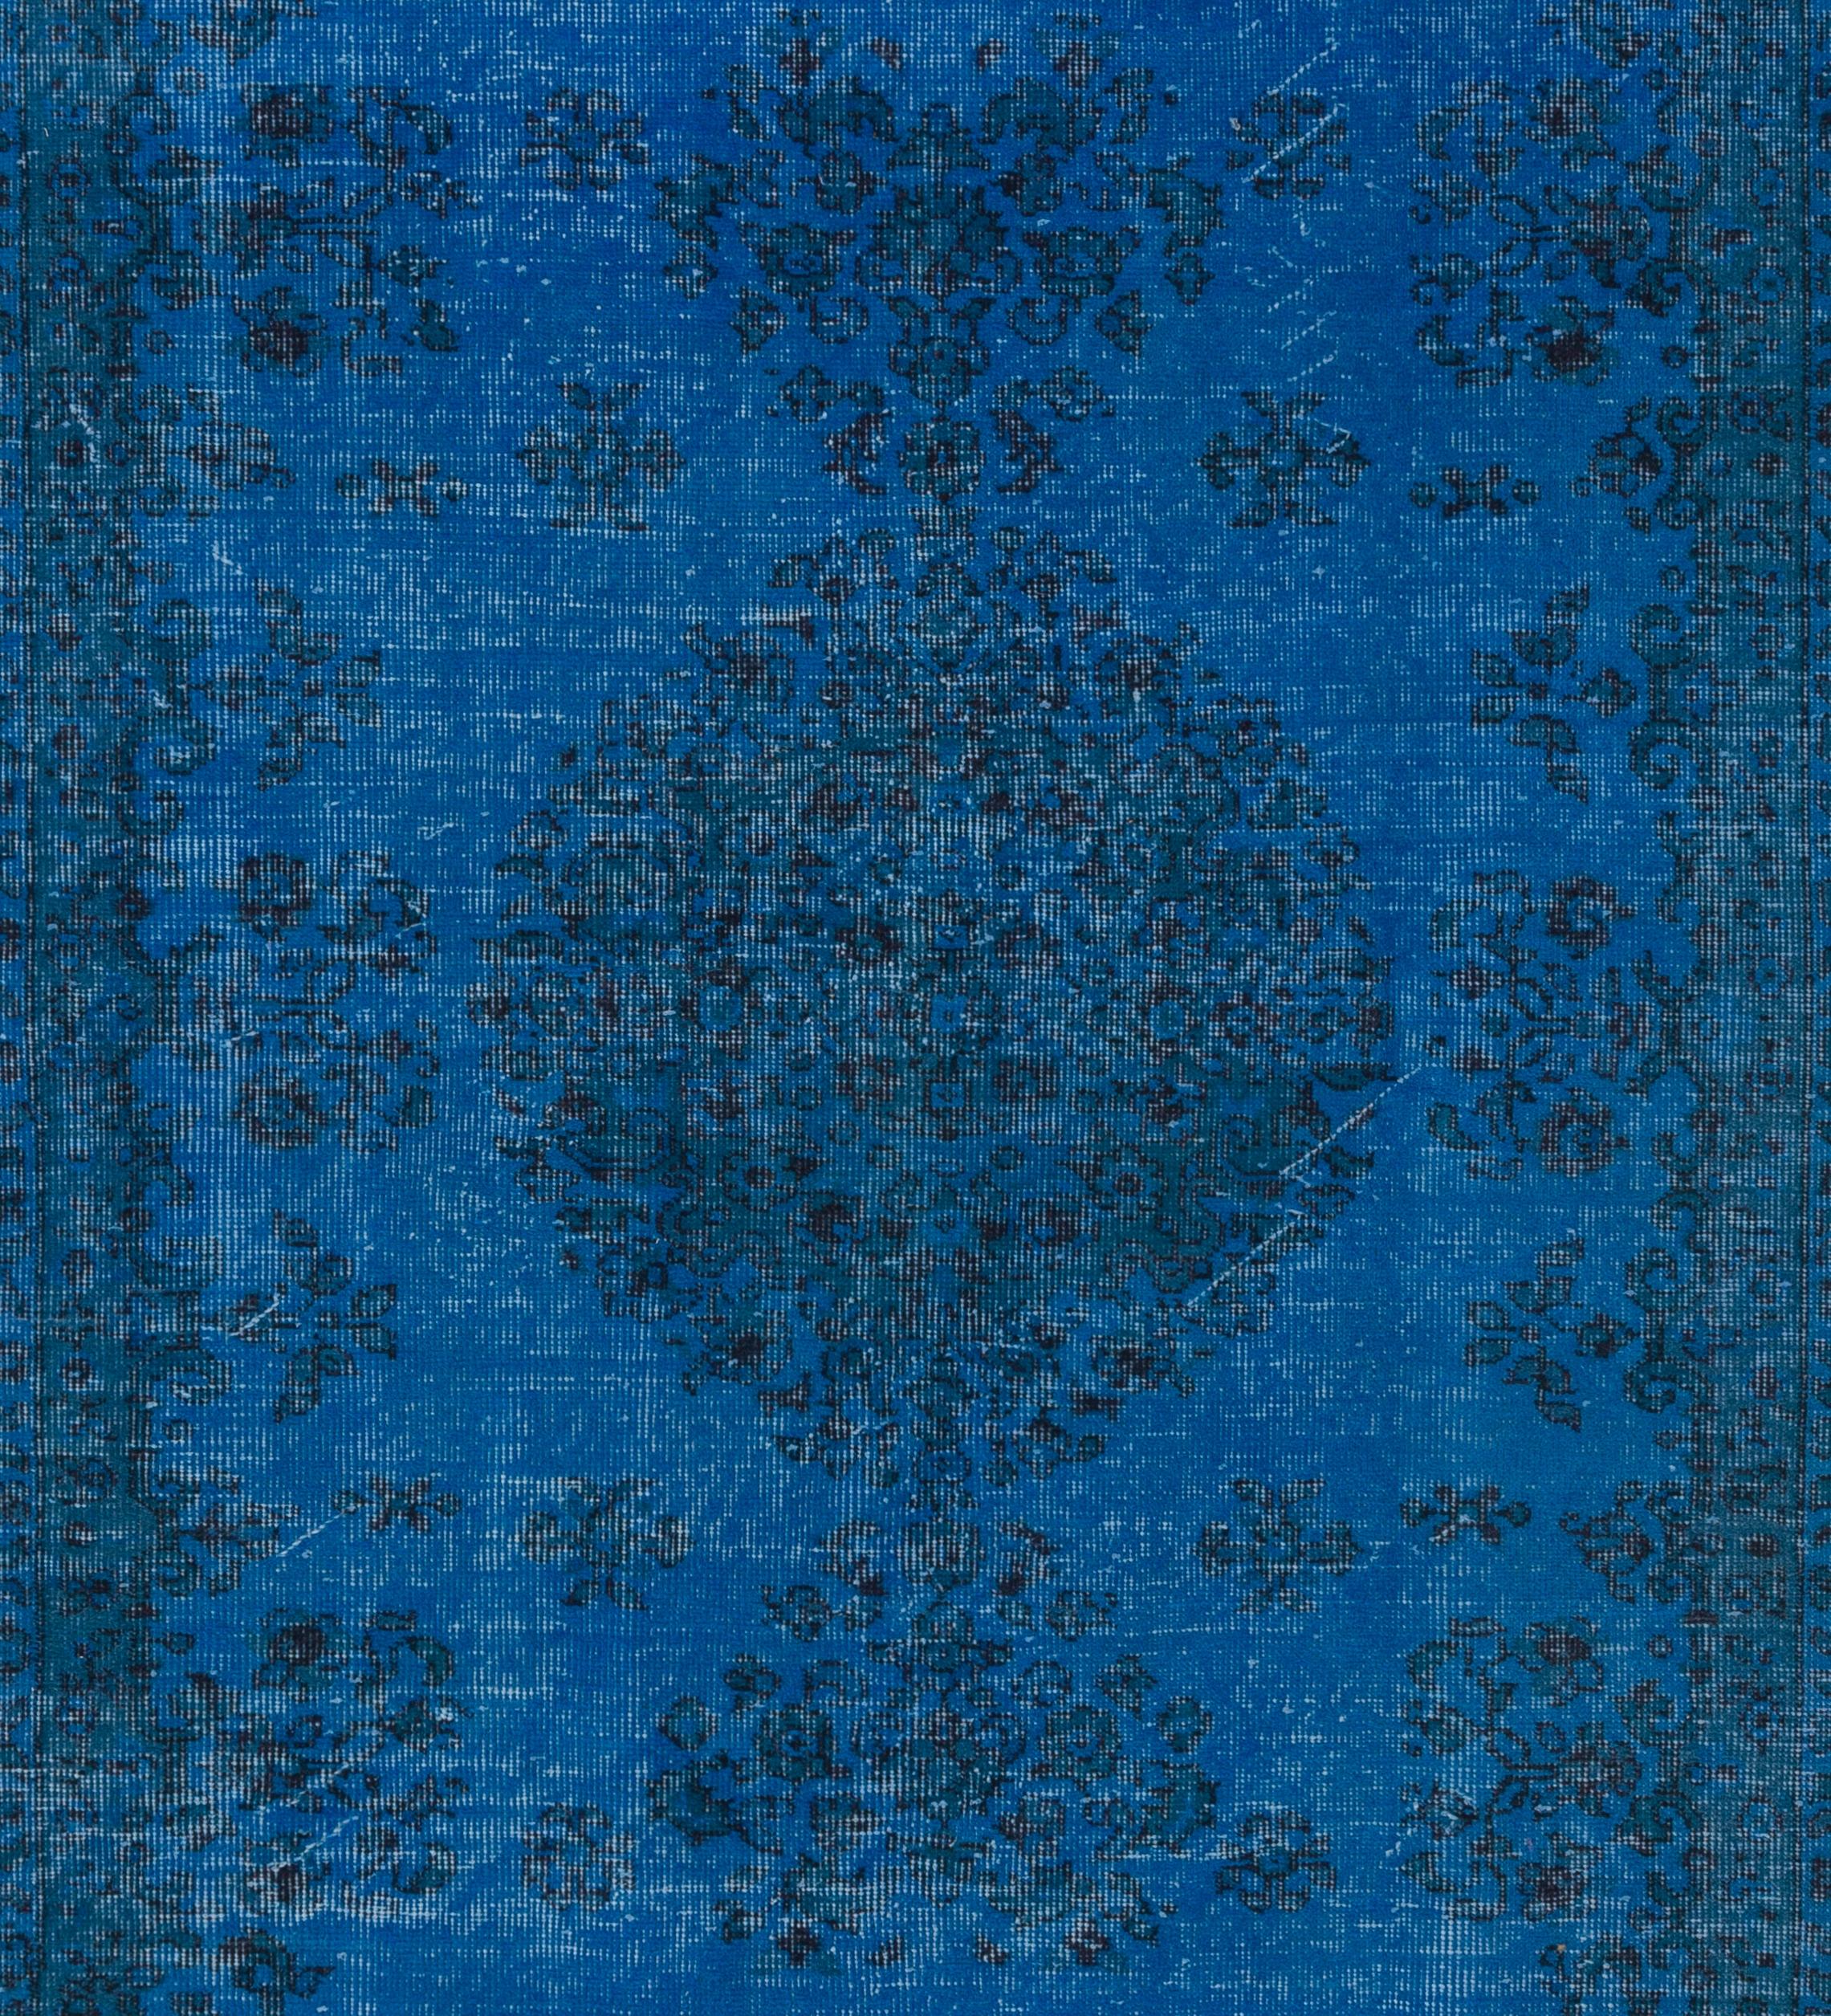 Turkish 5.4x8.6 Ft Vintage Rug Over-Dyed in Blue Color, Ideal for Contemporary Interiors